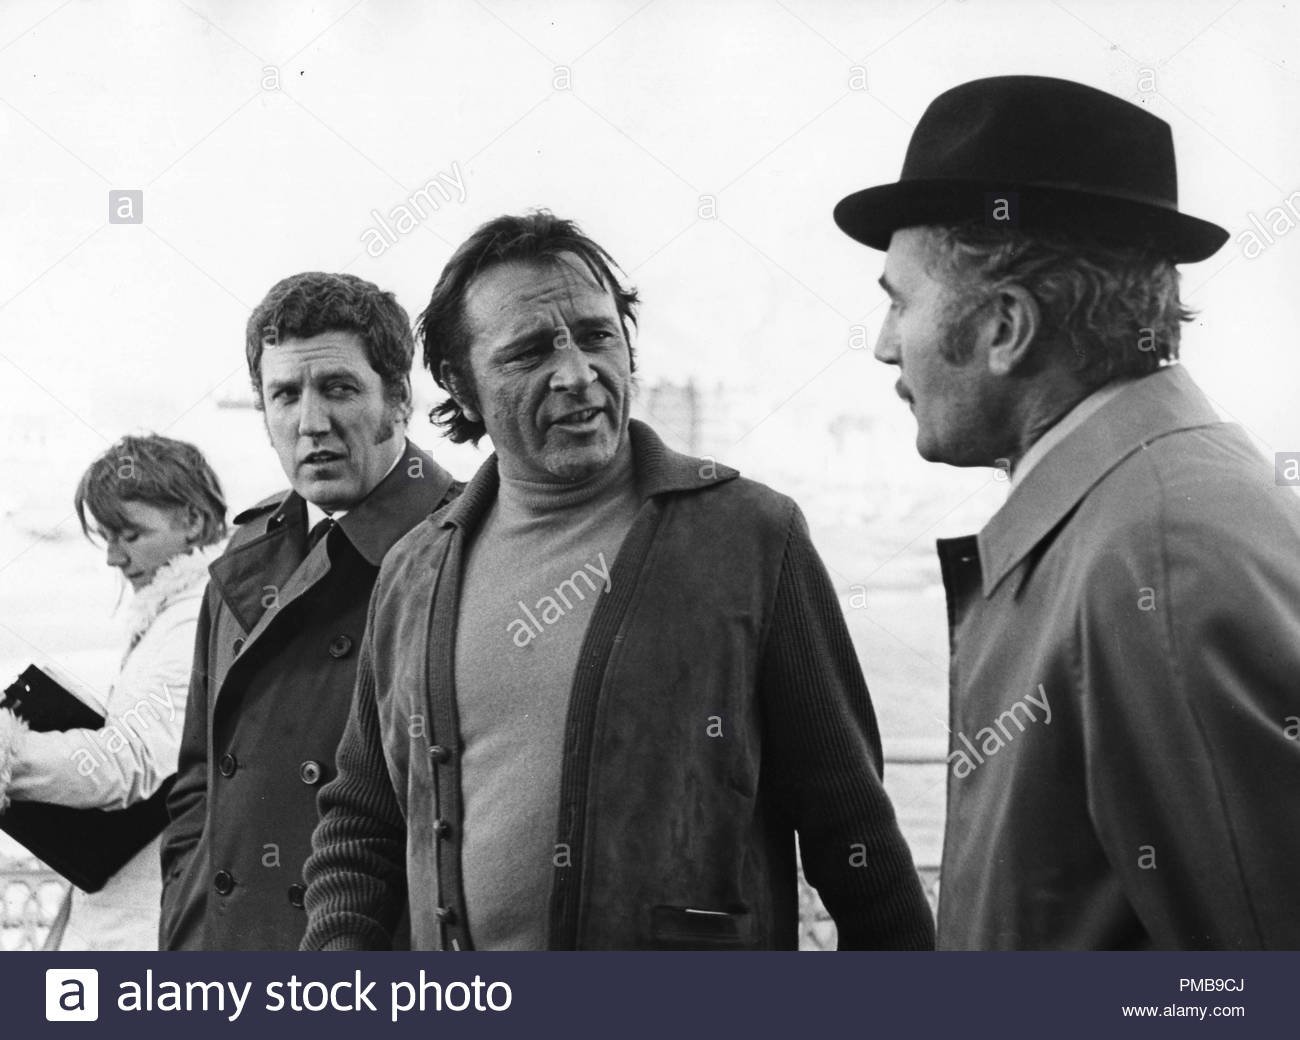 richard-burton-nigel-davenport-during-the-filming-of-villain-1970-jrc-the-hollywood-archive-all-rights-reserved-file-reference-32557-679tha-PMB9CJ.jpg  by Arthur Pringle